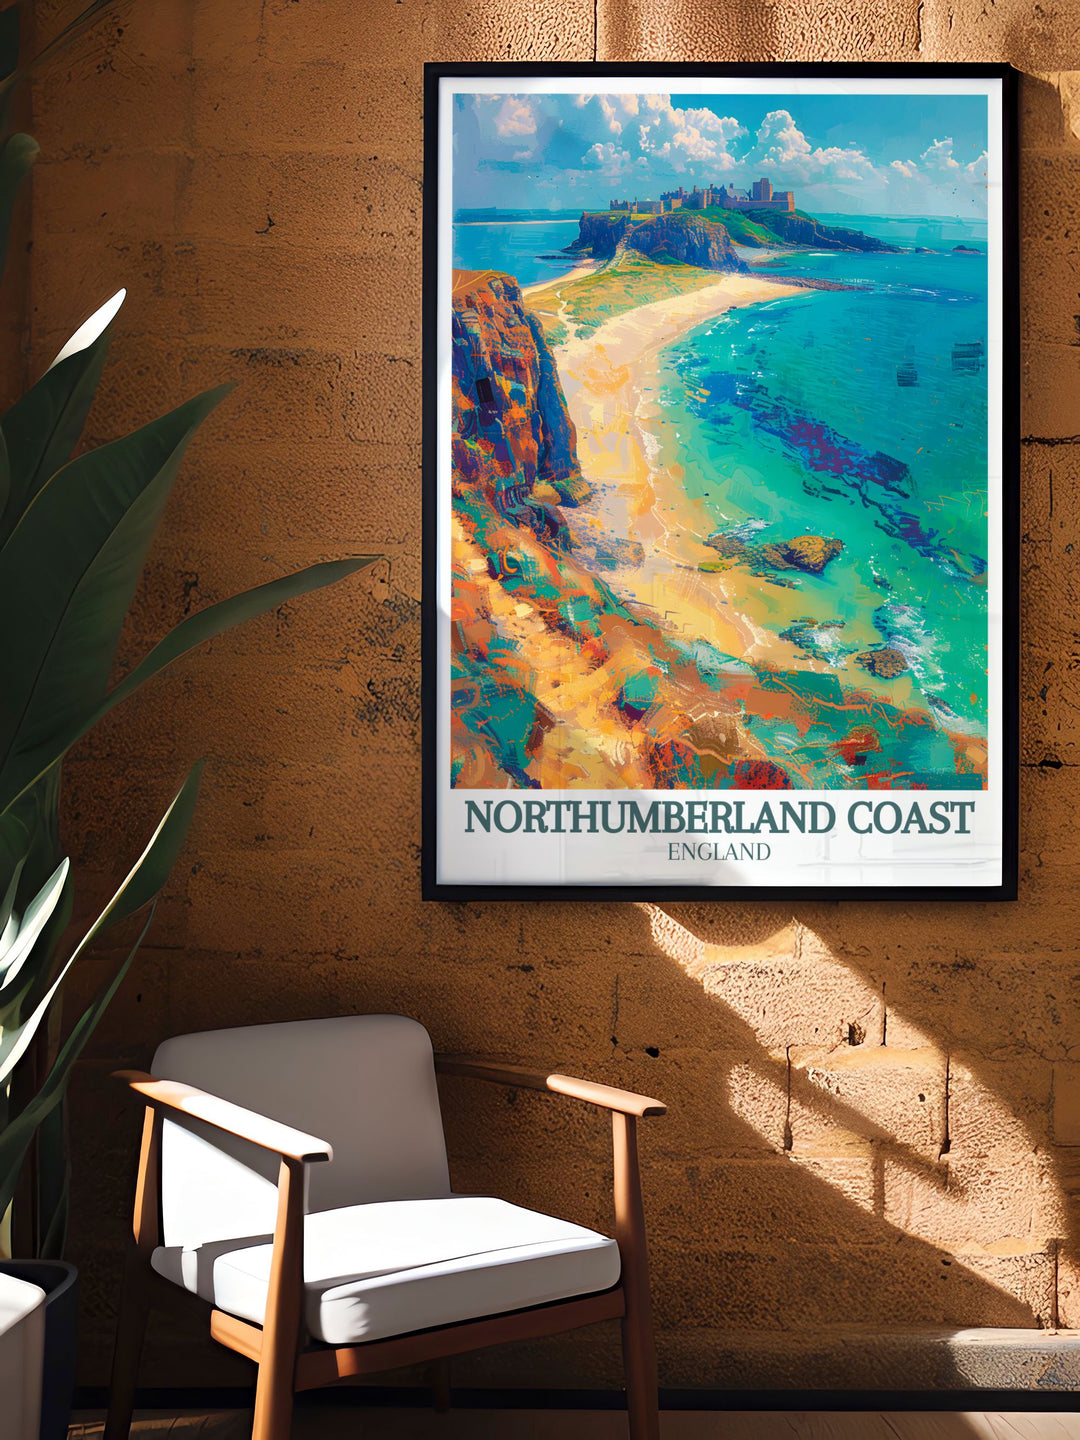 Retro railway print of Bamburgh Castle and Dunstanburgh Castle capturing the nostalgic essence of Northumberlands past and the scenic beauty of its coast an ideal piece for vintage art collectors and enthusiasts.